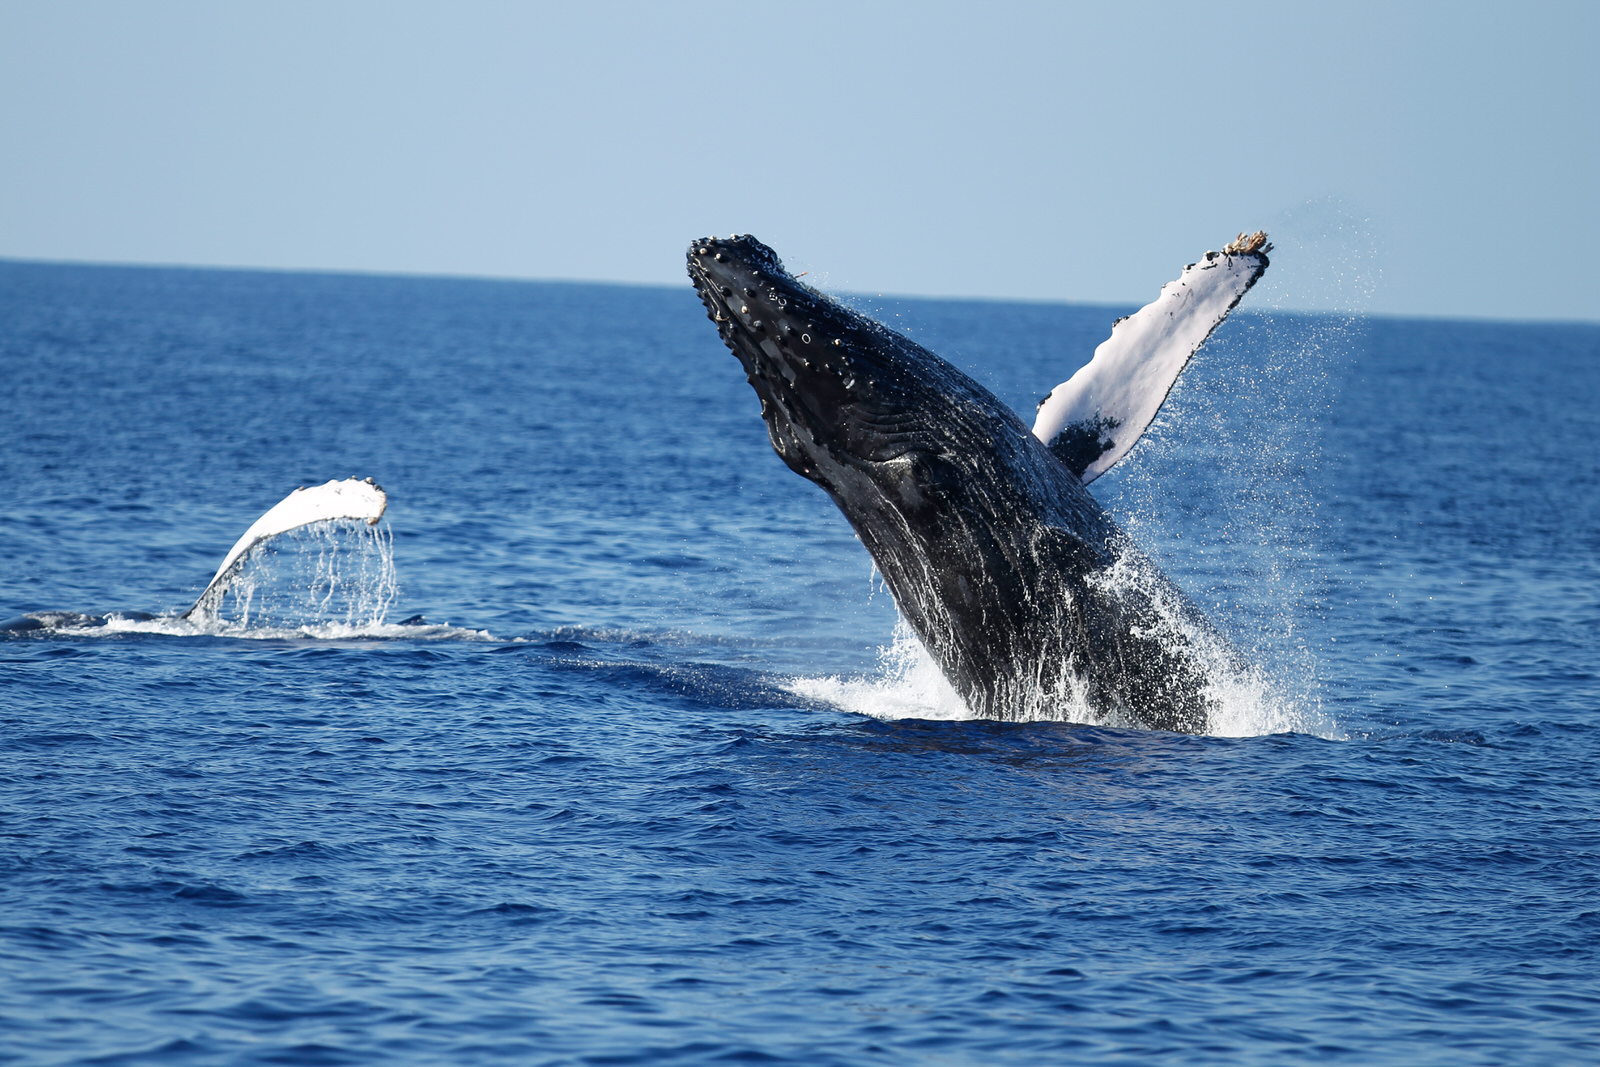 Oahu Tour Company Introduces Whale Watching Cruises This Winter